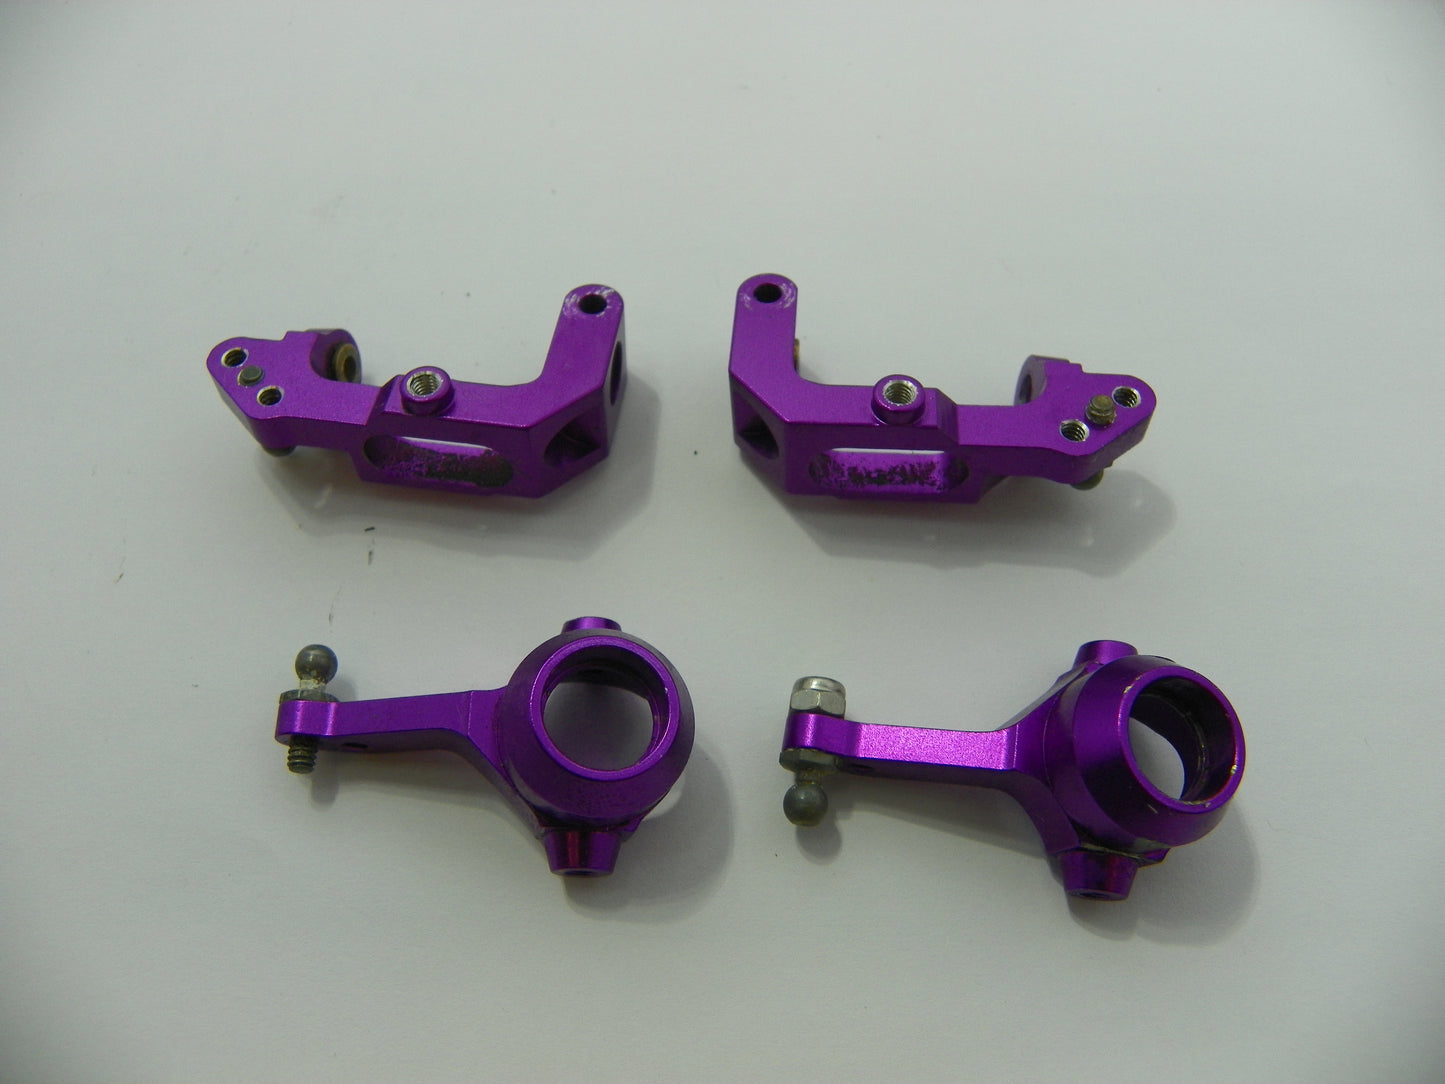 Aluminum Front Steering Knuckle Arm Hpi Rs4 Front Knuckle Hpi Steering Knuckle 85076